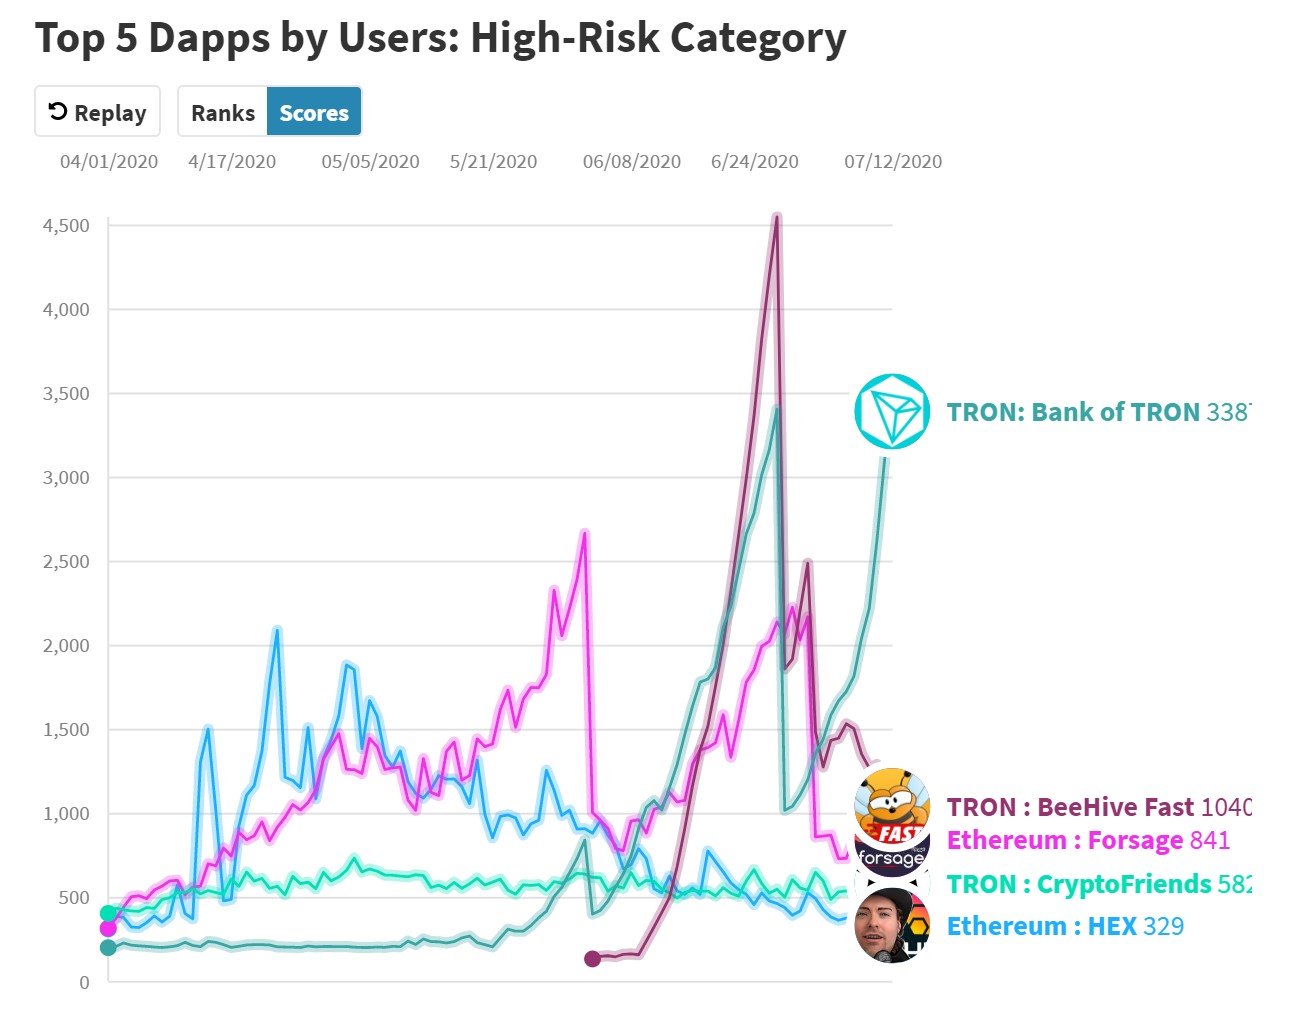 Top 5 Dapps by Users: High-Risk Category